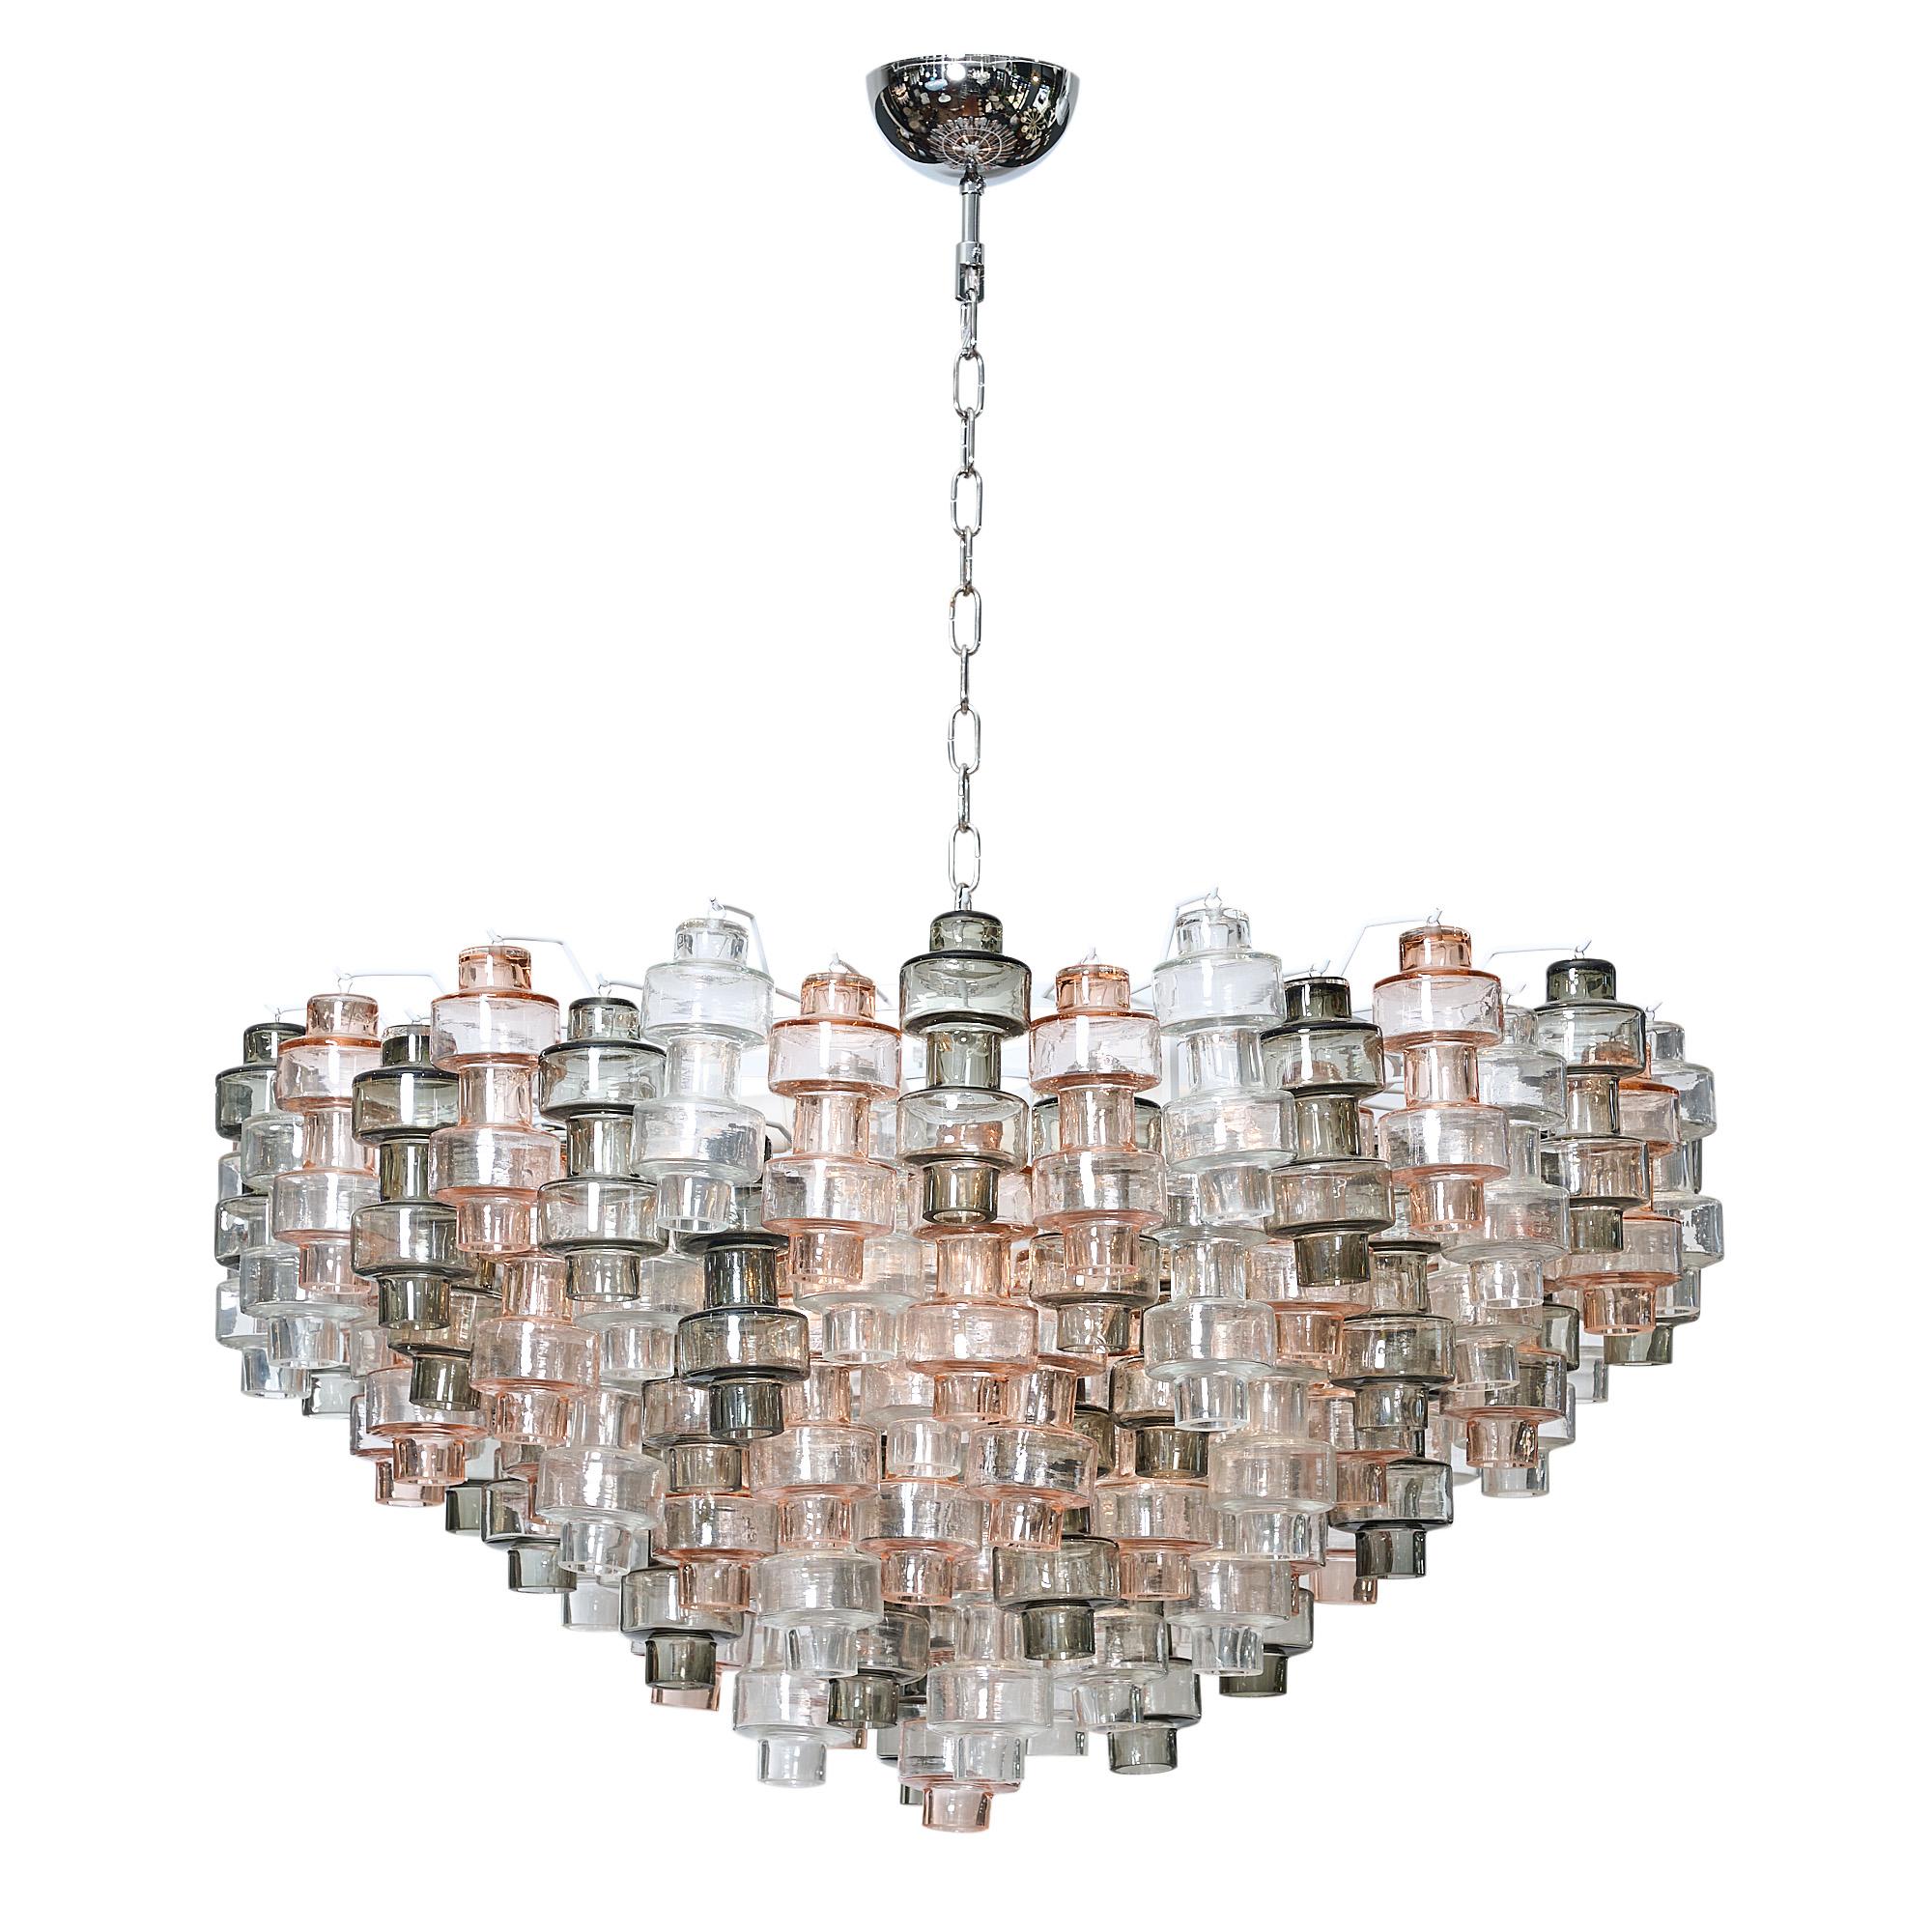 Fantastico! From the most prominent company in Murano, this is the pink and grey Manubri (dumbbells in Italian) Murano glass chandelier. Each component is hand-blown individually to create this organic and spectacular fixture. We couldn’t resist the